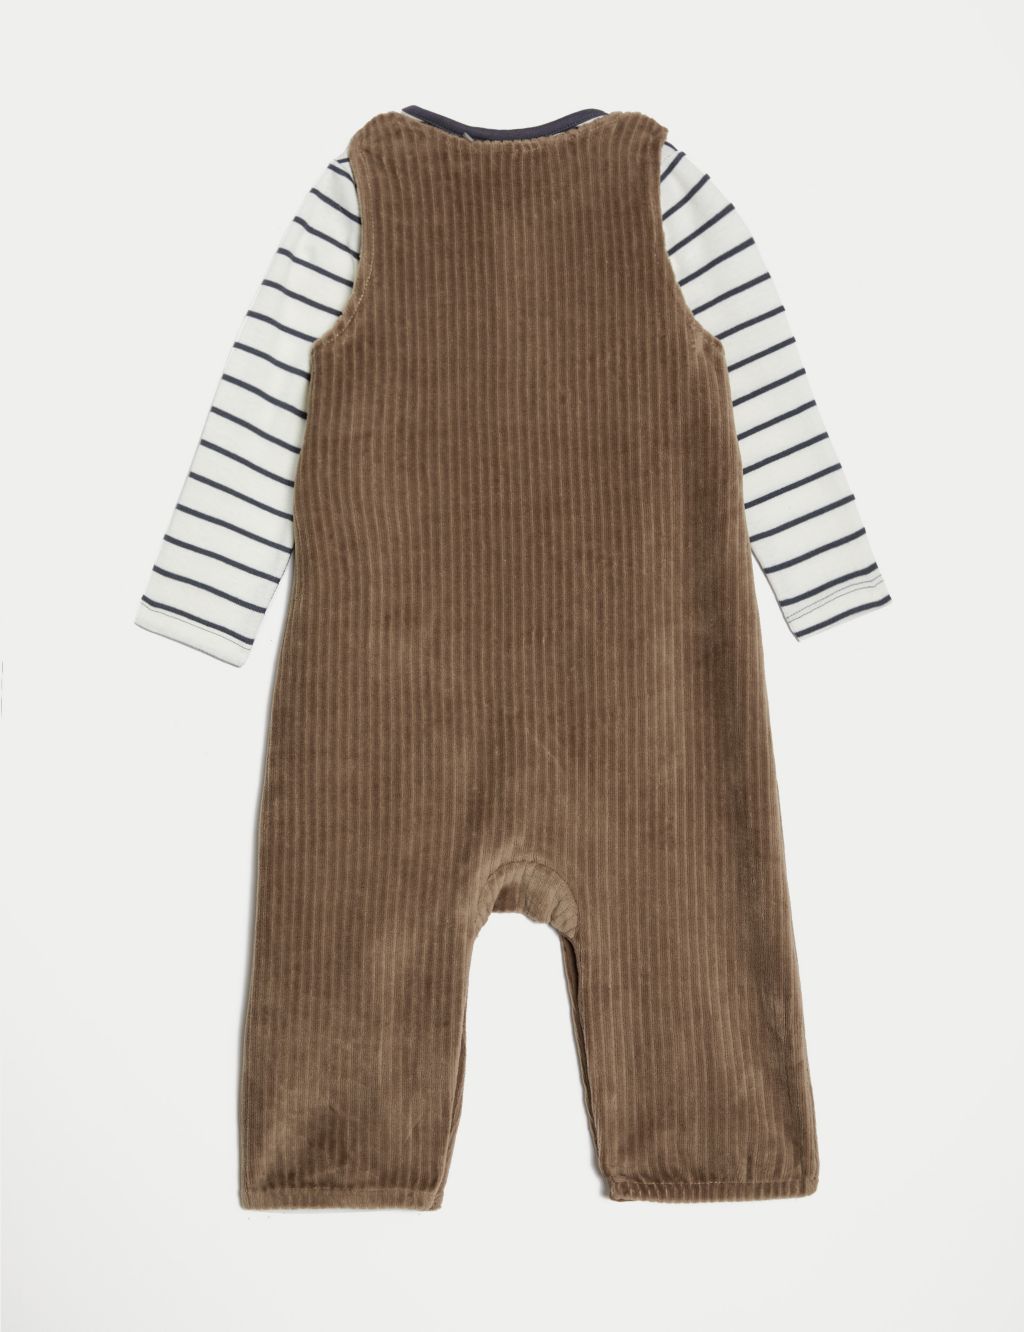 2pc Cotton Rich Striped Outfit (0-3 Yrs) image 2